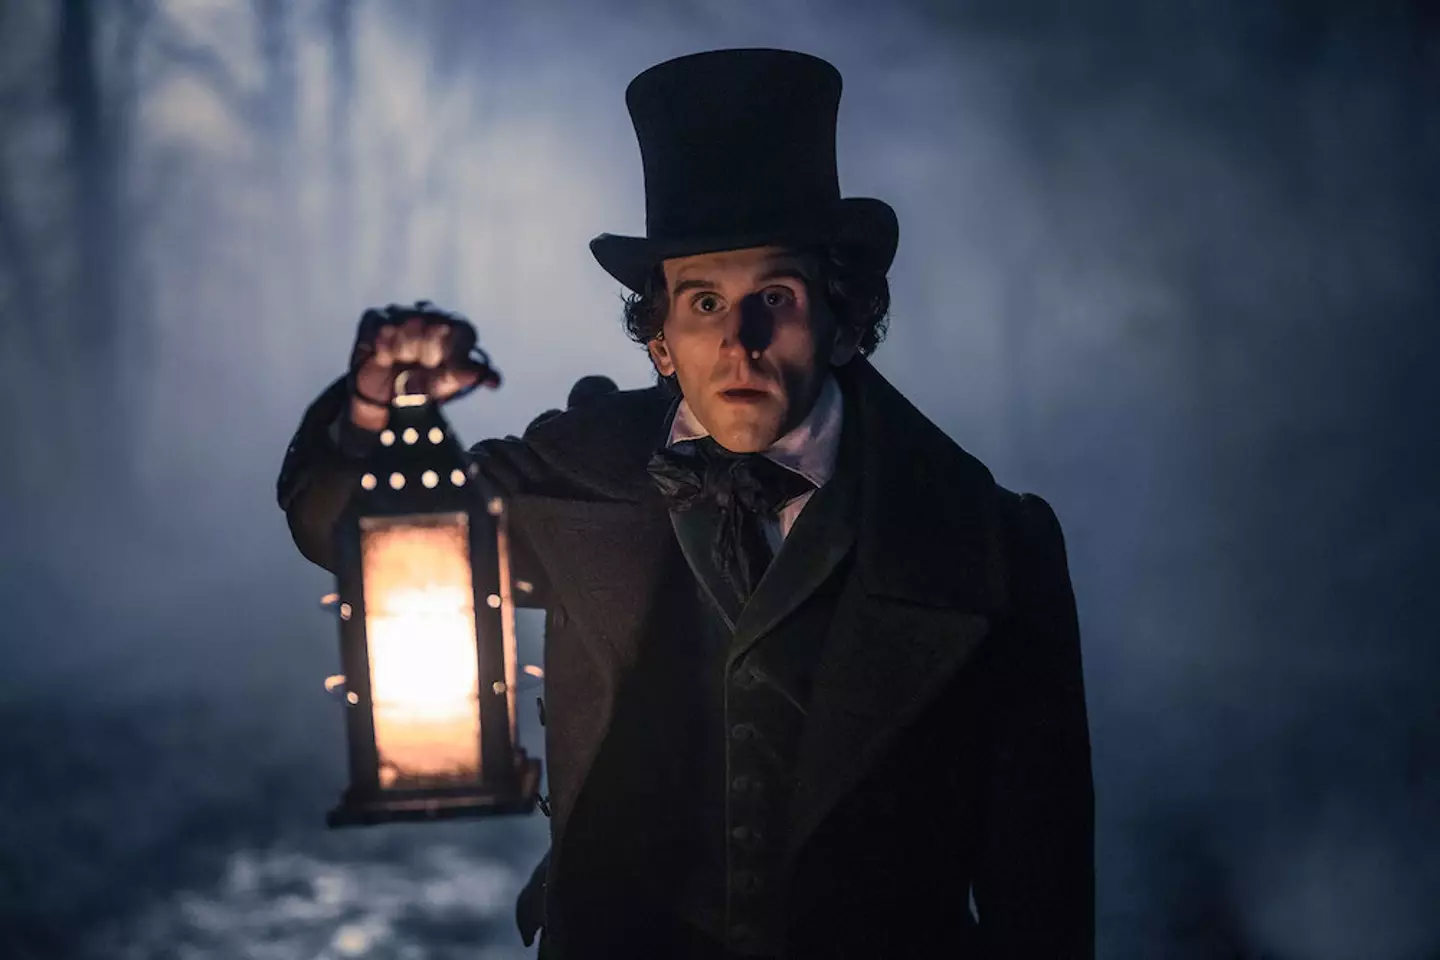 Fans have been blown away by his performance as Edgar Allan Poe.